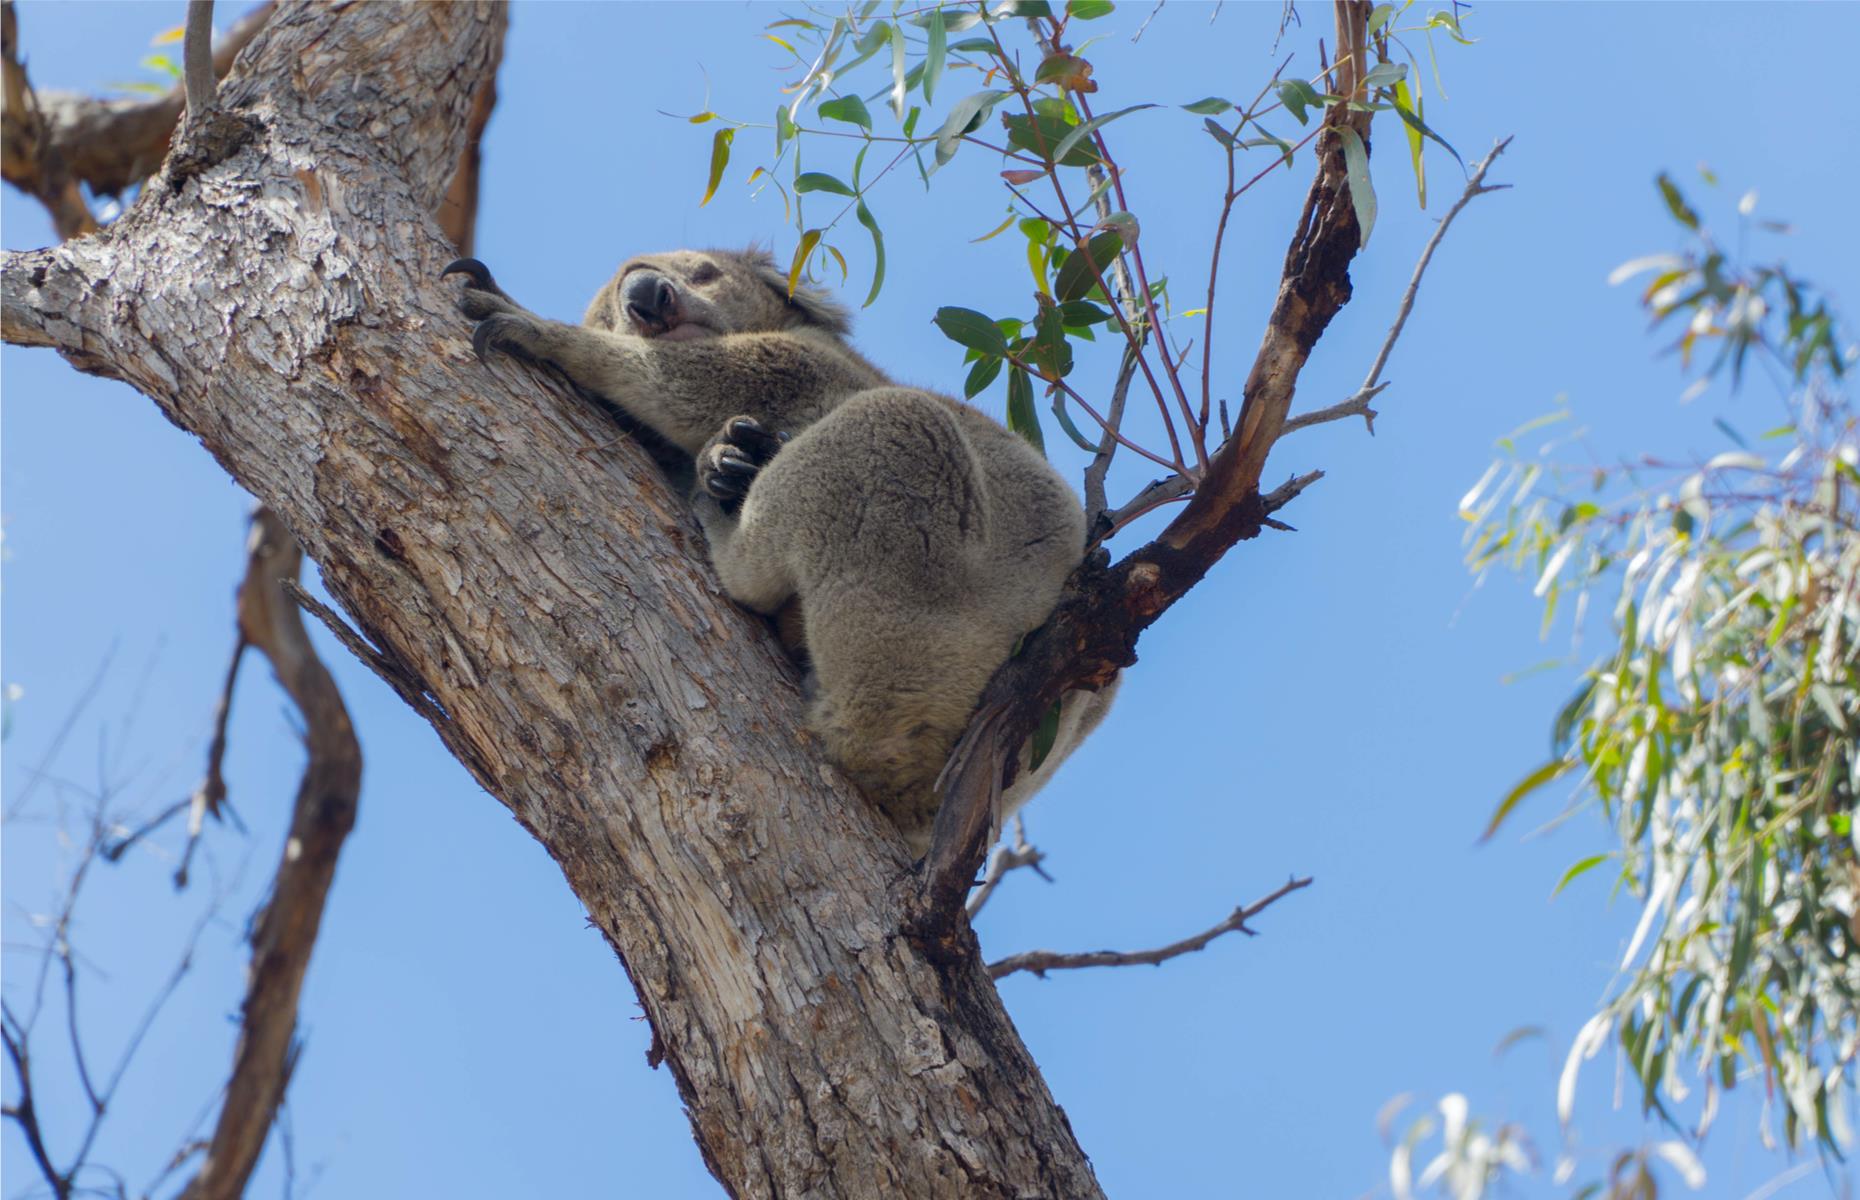 <p>Little Raymond Island in the Gippsland Lakes is one of the best places to see wild koalas and you can get there for free. Jump on the <a href="https://www.eastgippsland.vic.gov.au/community/raymond-island-ferry">ferry</a> (no charge for walkers and cyclists) from Paynesville and follow the Koala Trail through its gumtrees. Before you know it, you’ll be cooing at the sight of furry friends resting in the nook of the eucalypts, smug in the knowledge you've not paid any cash to see them. Its population has boomed since 16 male and 26 female koalas were relocated from Philip Island to Raymond Island in 1953 to aid conservation of the species.</p>  <p><strong><a href="https://www.loveexploring.com/gallerylist/147657/from-sea-dragons-to-cute-koalas-australias-best-wildlife-experiences">From sea dragons to cute koalas: Australia's best wildlife experiences​</a></strong></p>